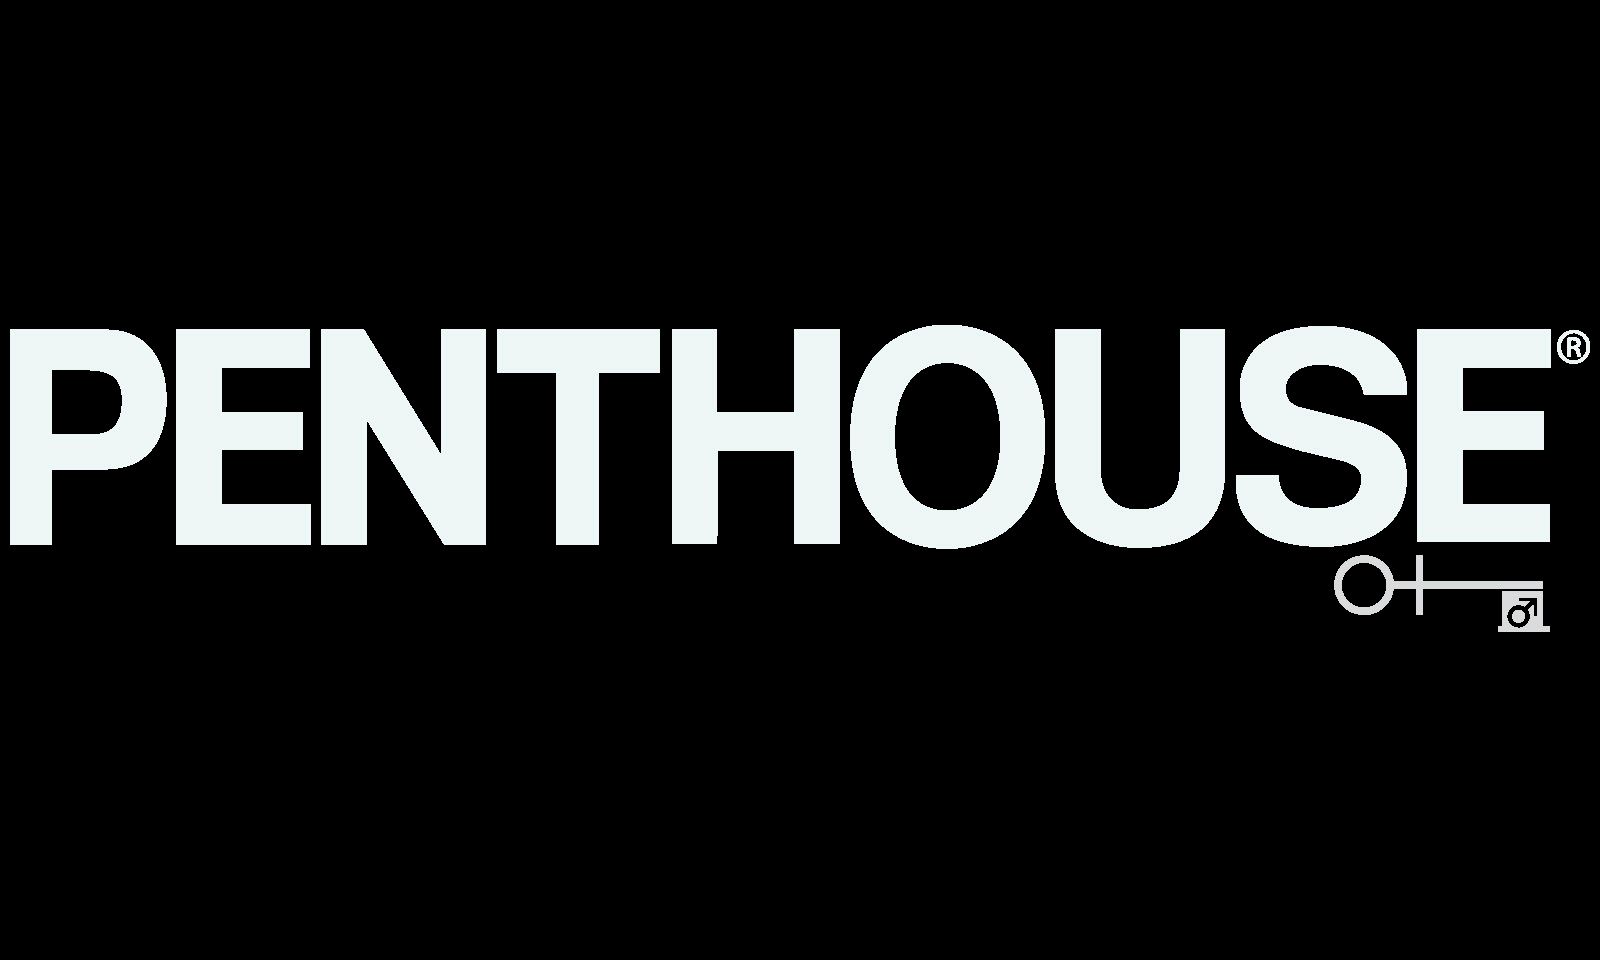 Penthouse Pits 'Kittens vs. Cougars' Against 'Brazilian Beauties' on Feb. 23